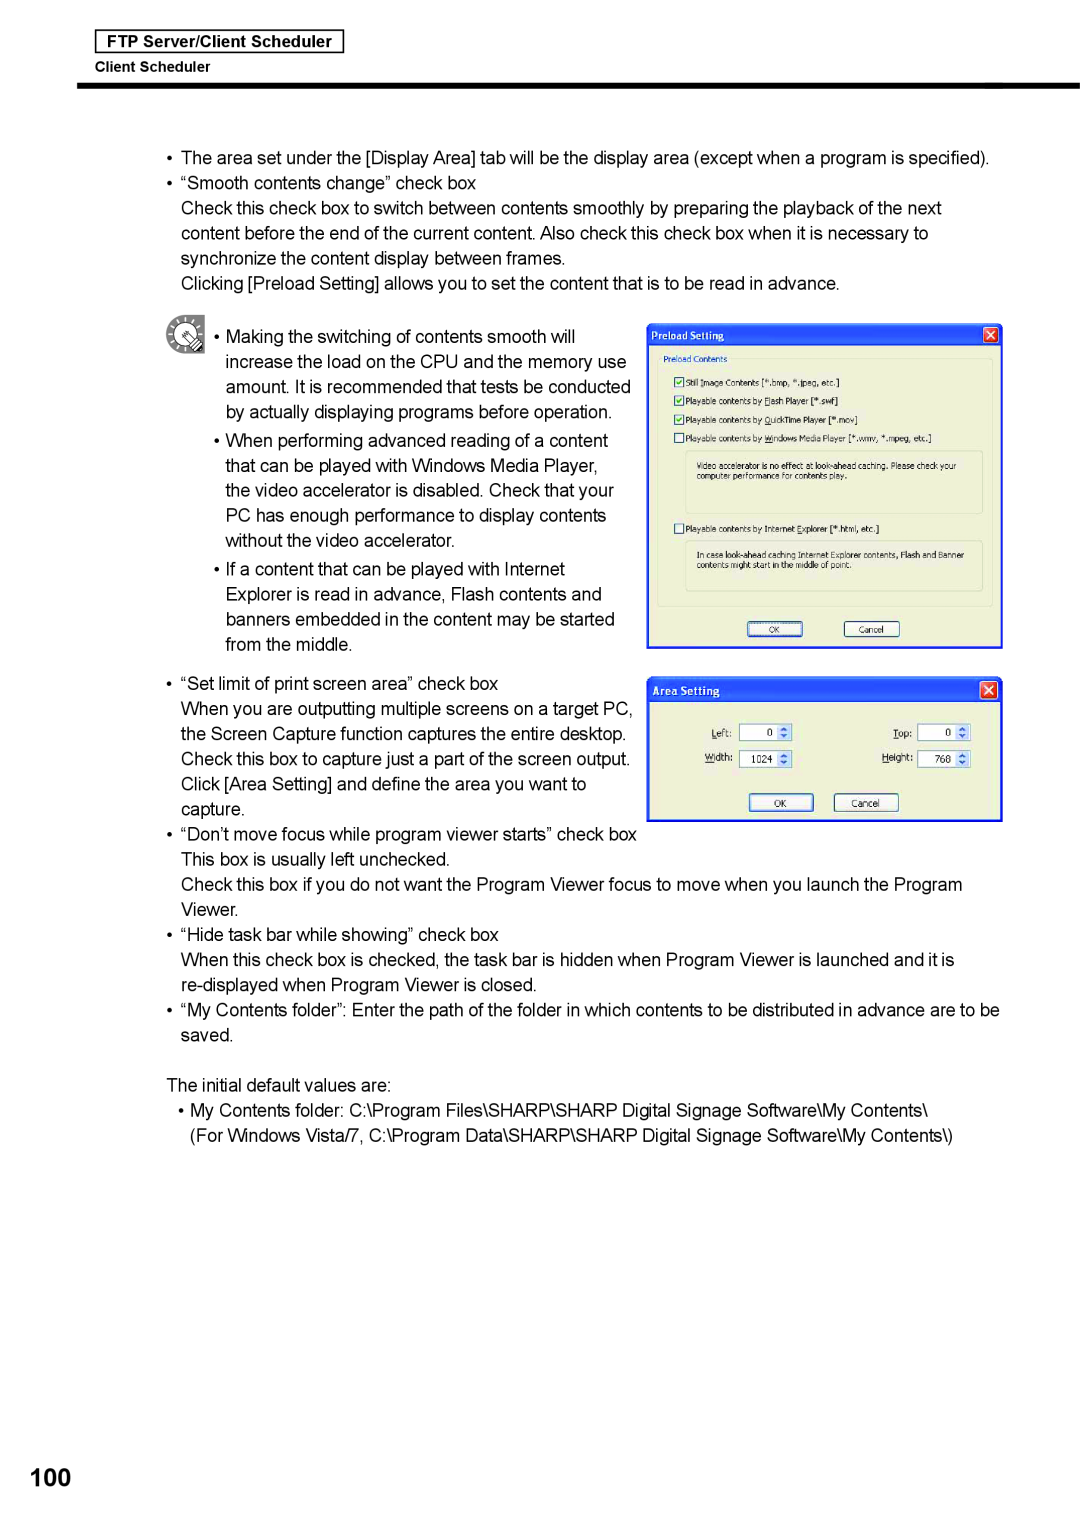 Sharp PNSV01 operation manual “Smooth contents change” check box 